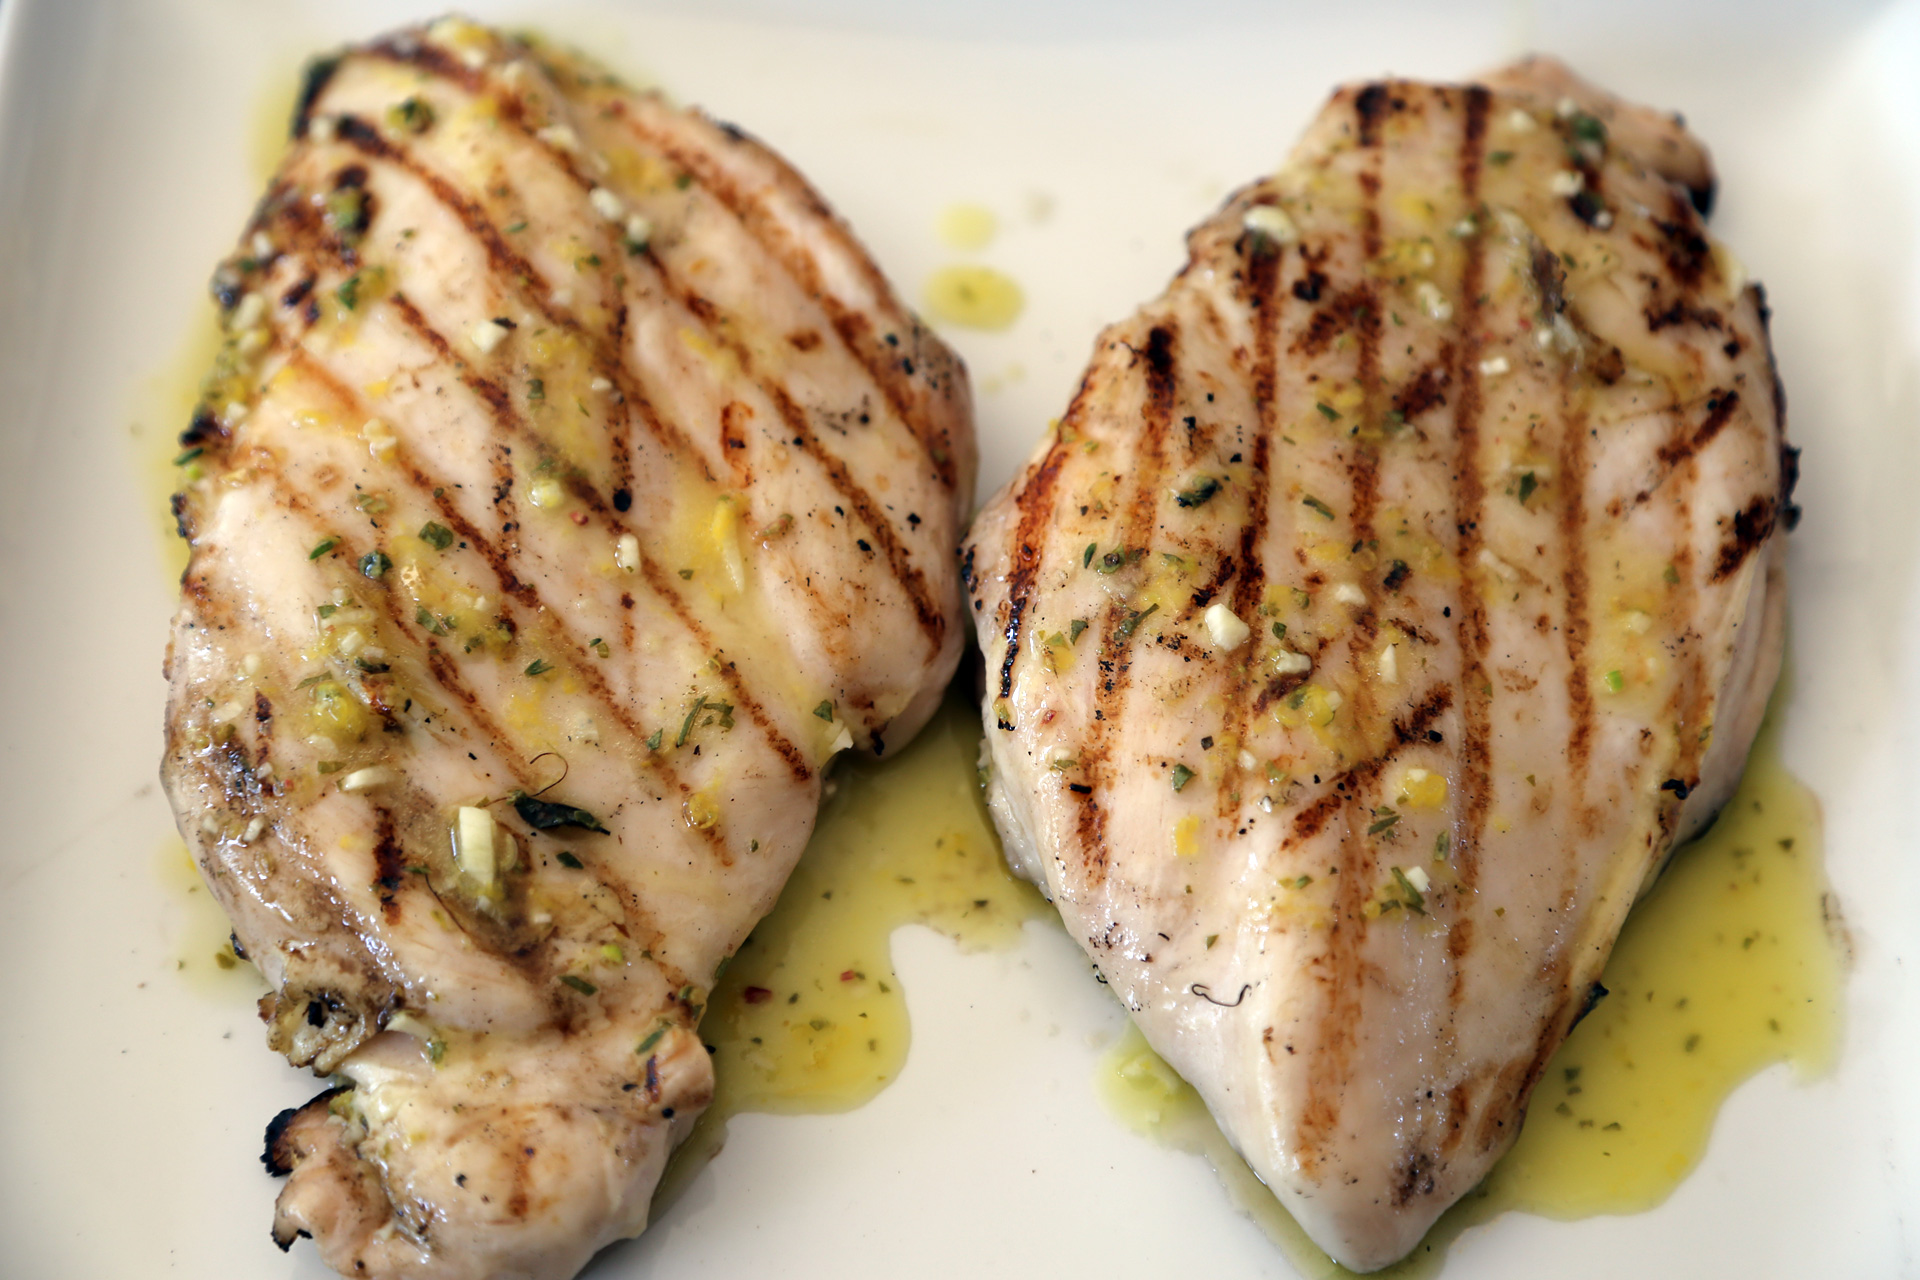 Spoon the vinaigrette on top of the rested chicken breasts and serve.